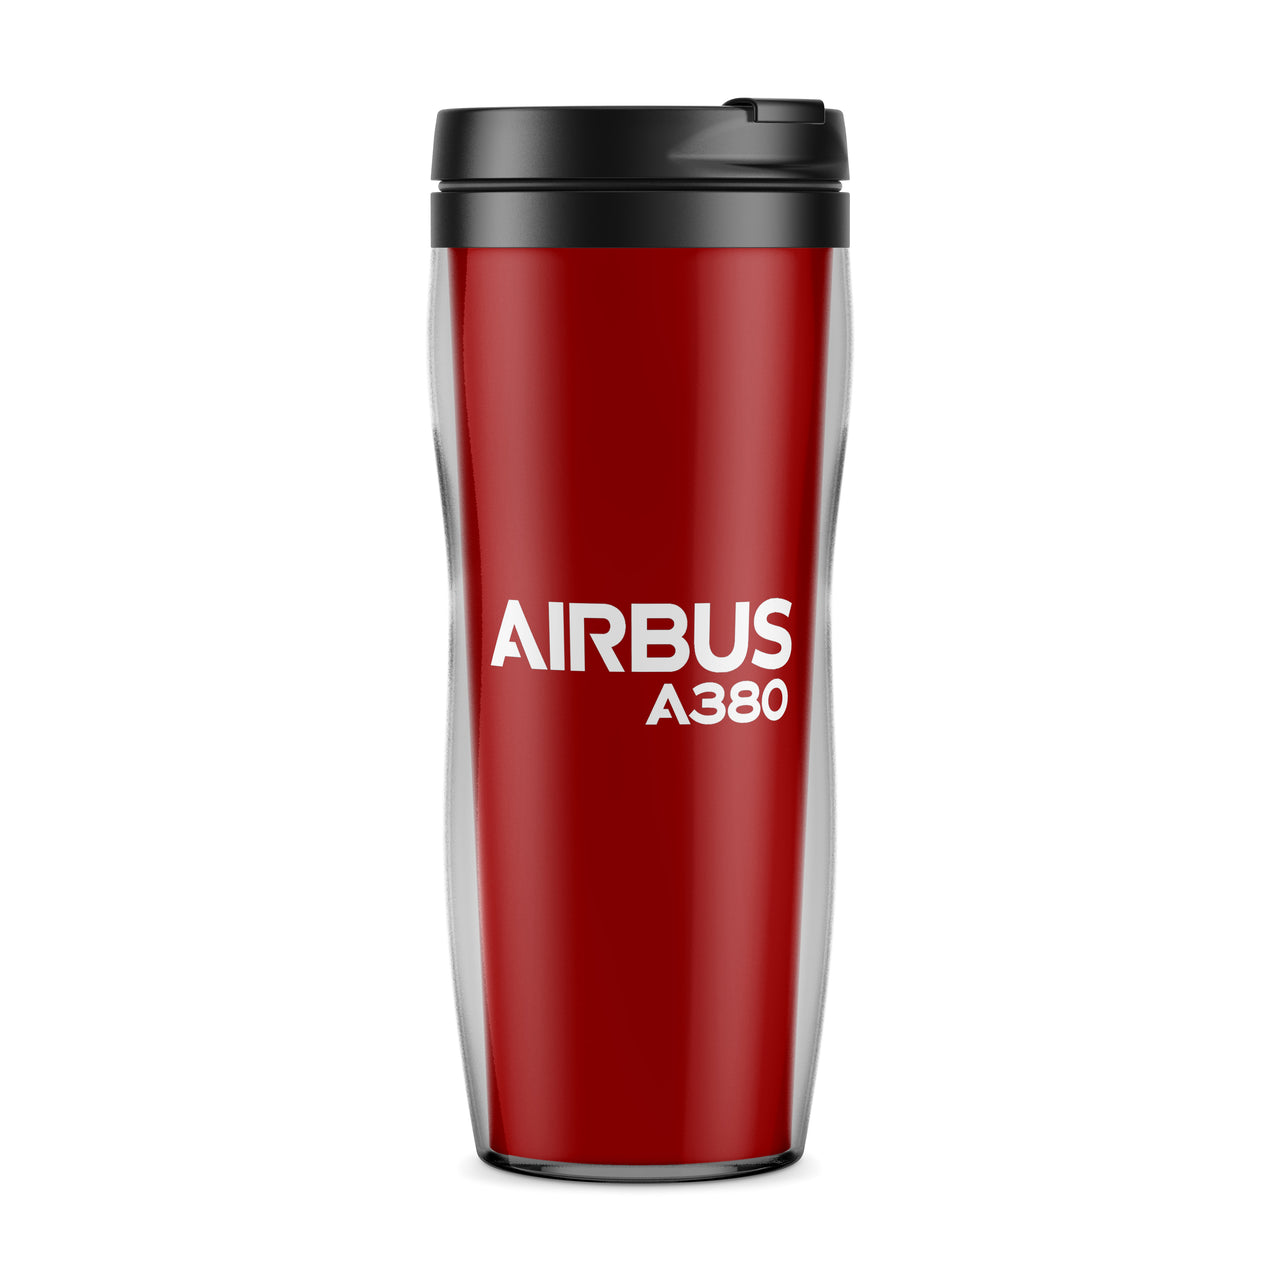 Airbus A380 & Text Designed Travel Mugs